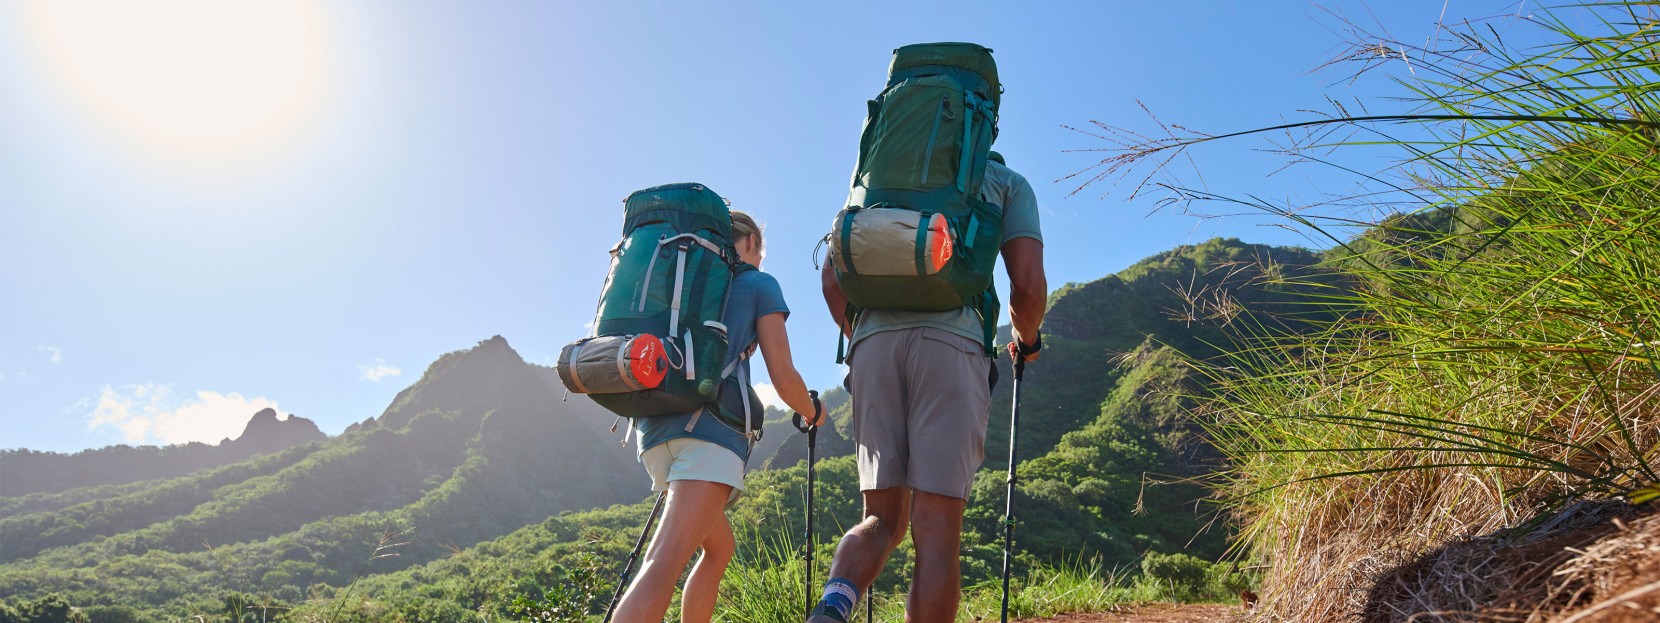 2 hikers wearing large packs and using hiking poles, shot from behind, beautiful mountain scene and blue sky.